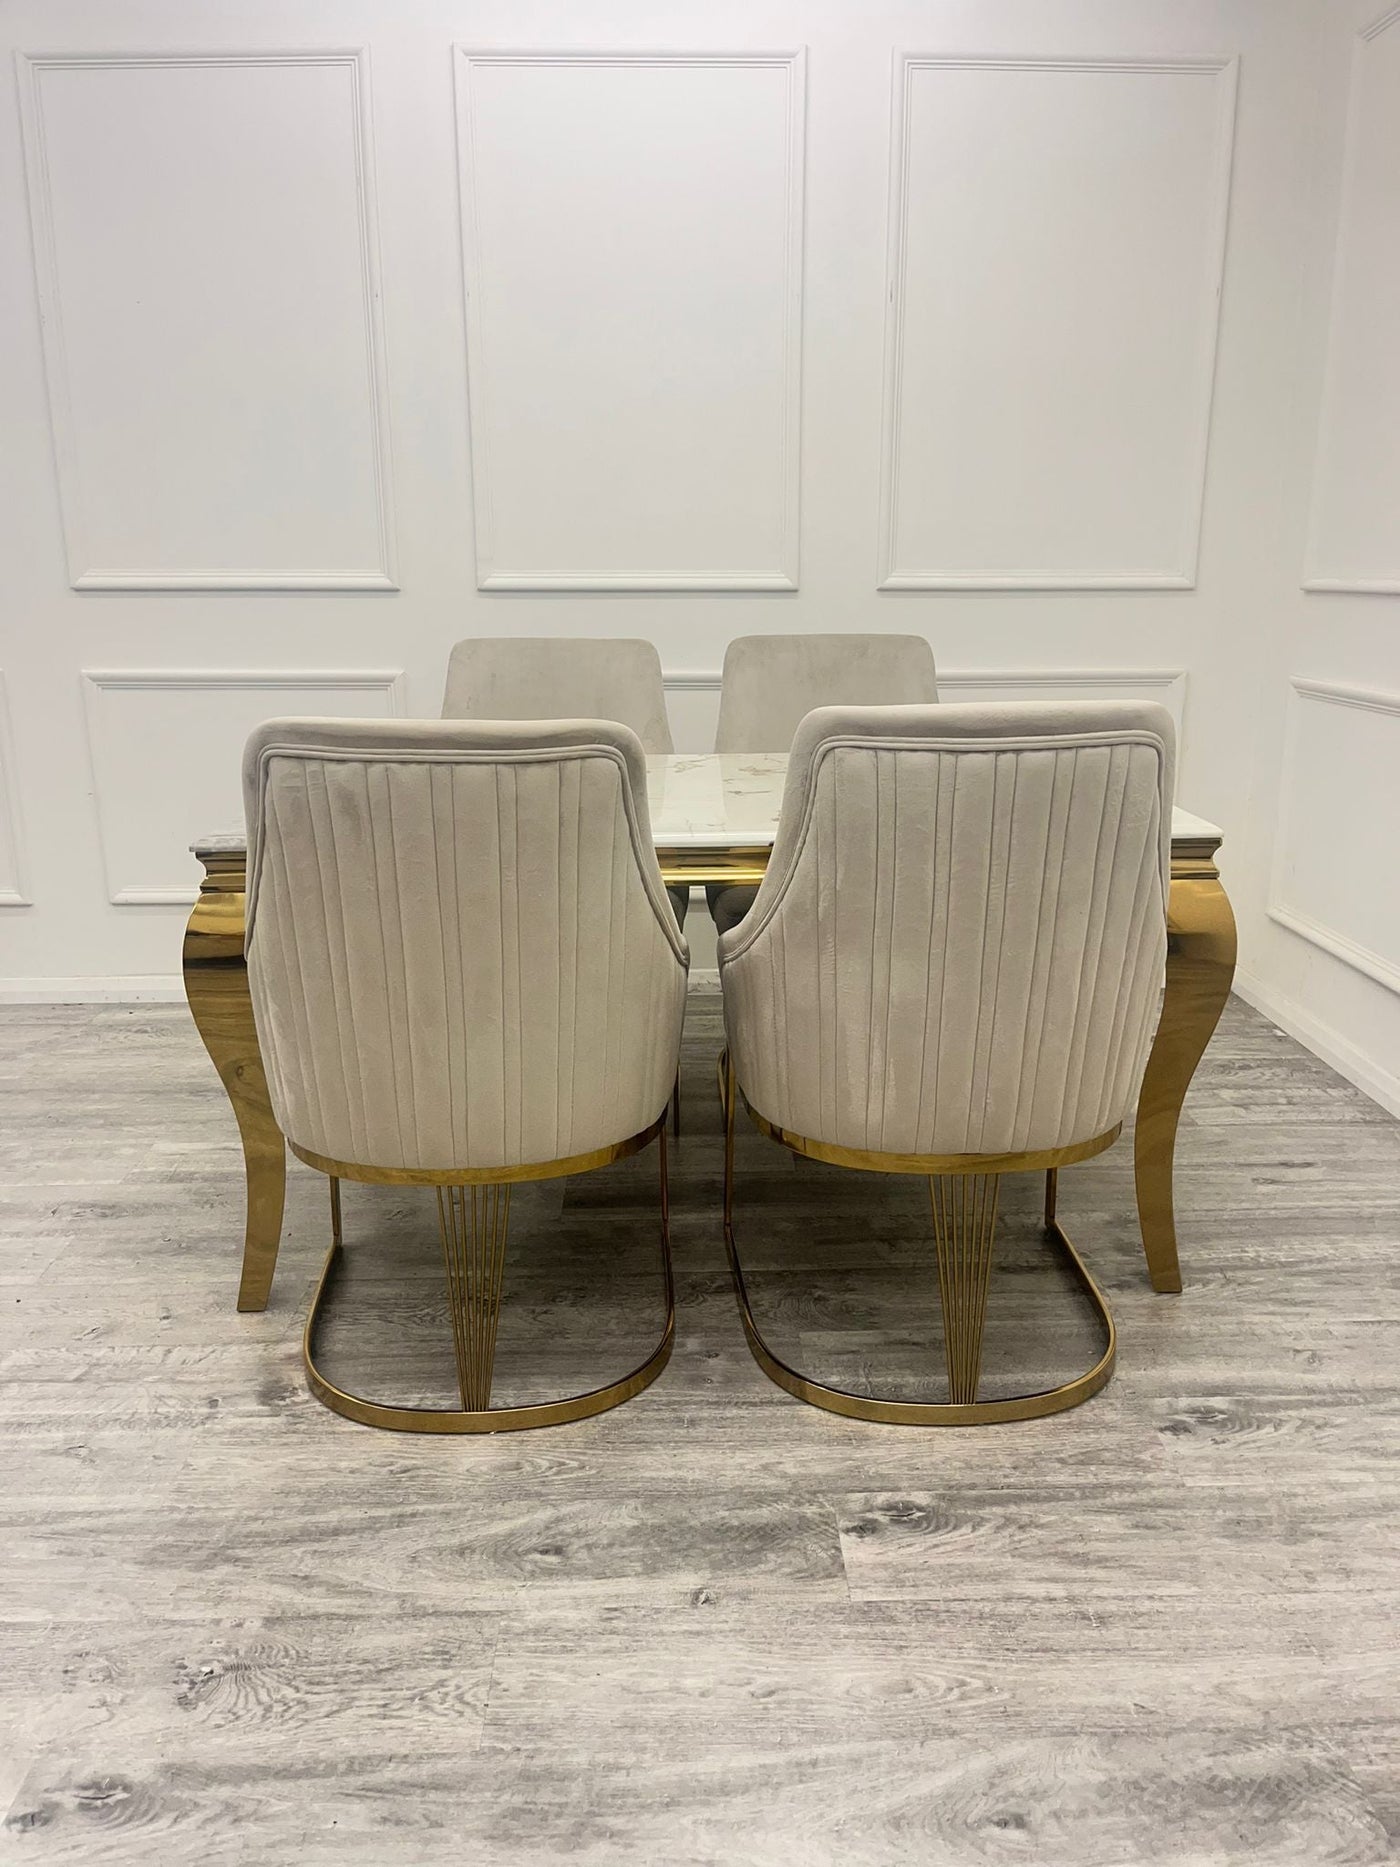 Arianna 180cm Gold Marble Dining Table With Carlton Cream/Gold Velvet Dining Chairs